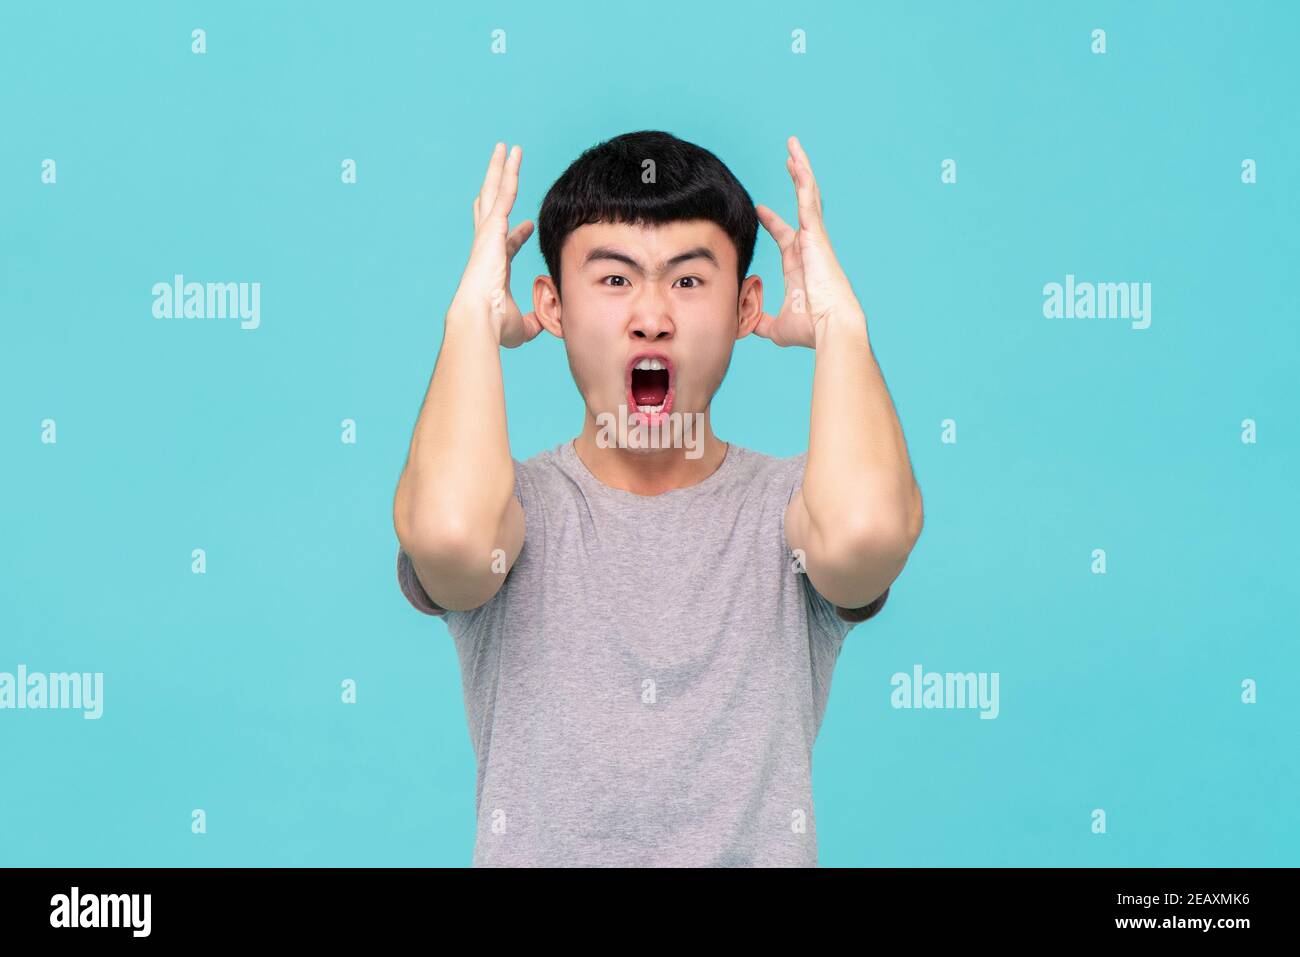 Aggressive angry young Asian man emotionally shouting isolated on light blue studio background Stock Photo